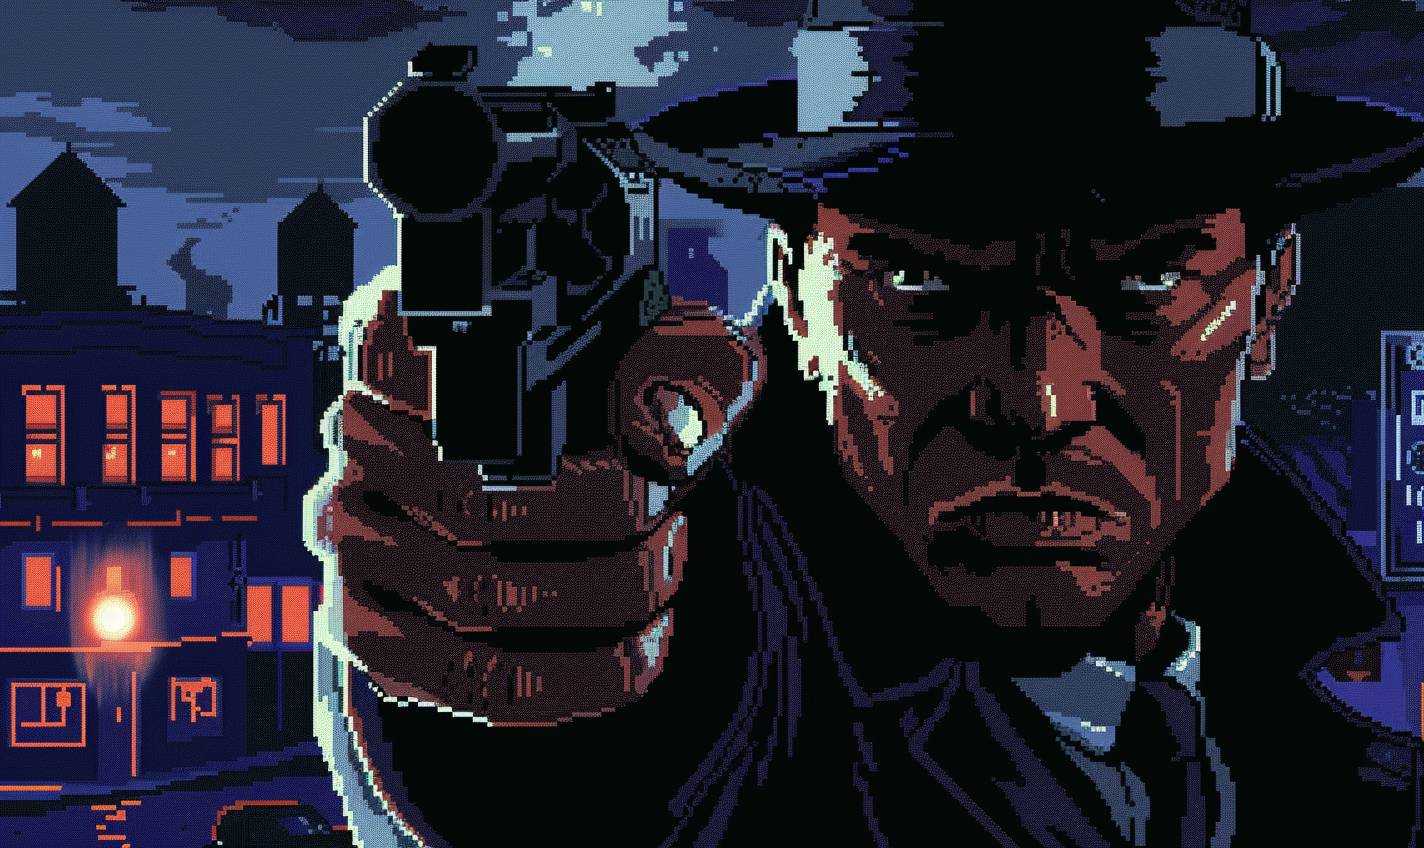 8-bit pixel art close-up of a ruthless gangster with a fedora holding a tommy gun looking at the camera in front of a speakeasy, with a 1920s city background, using flat colors, simple shapes, video game design style with a dark palette, high contrast, pixelation, and low resolution, gritty textures, dynamic action pose, pixel art face and close-up view